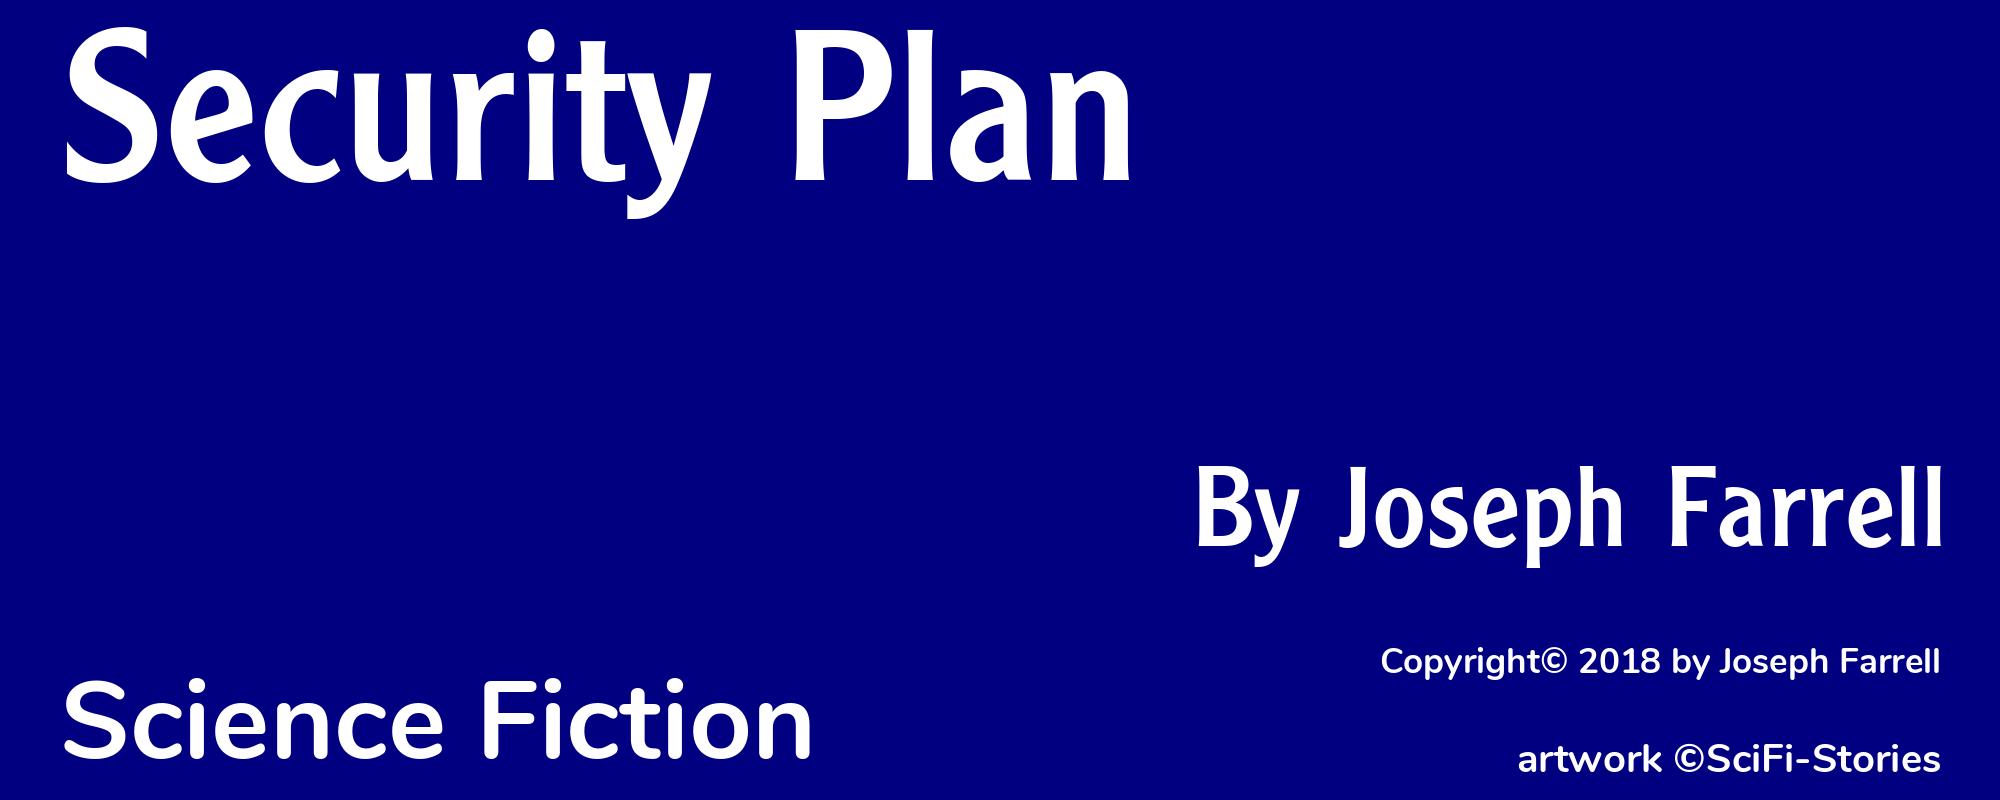 Security Plan - Cover